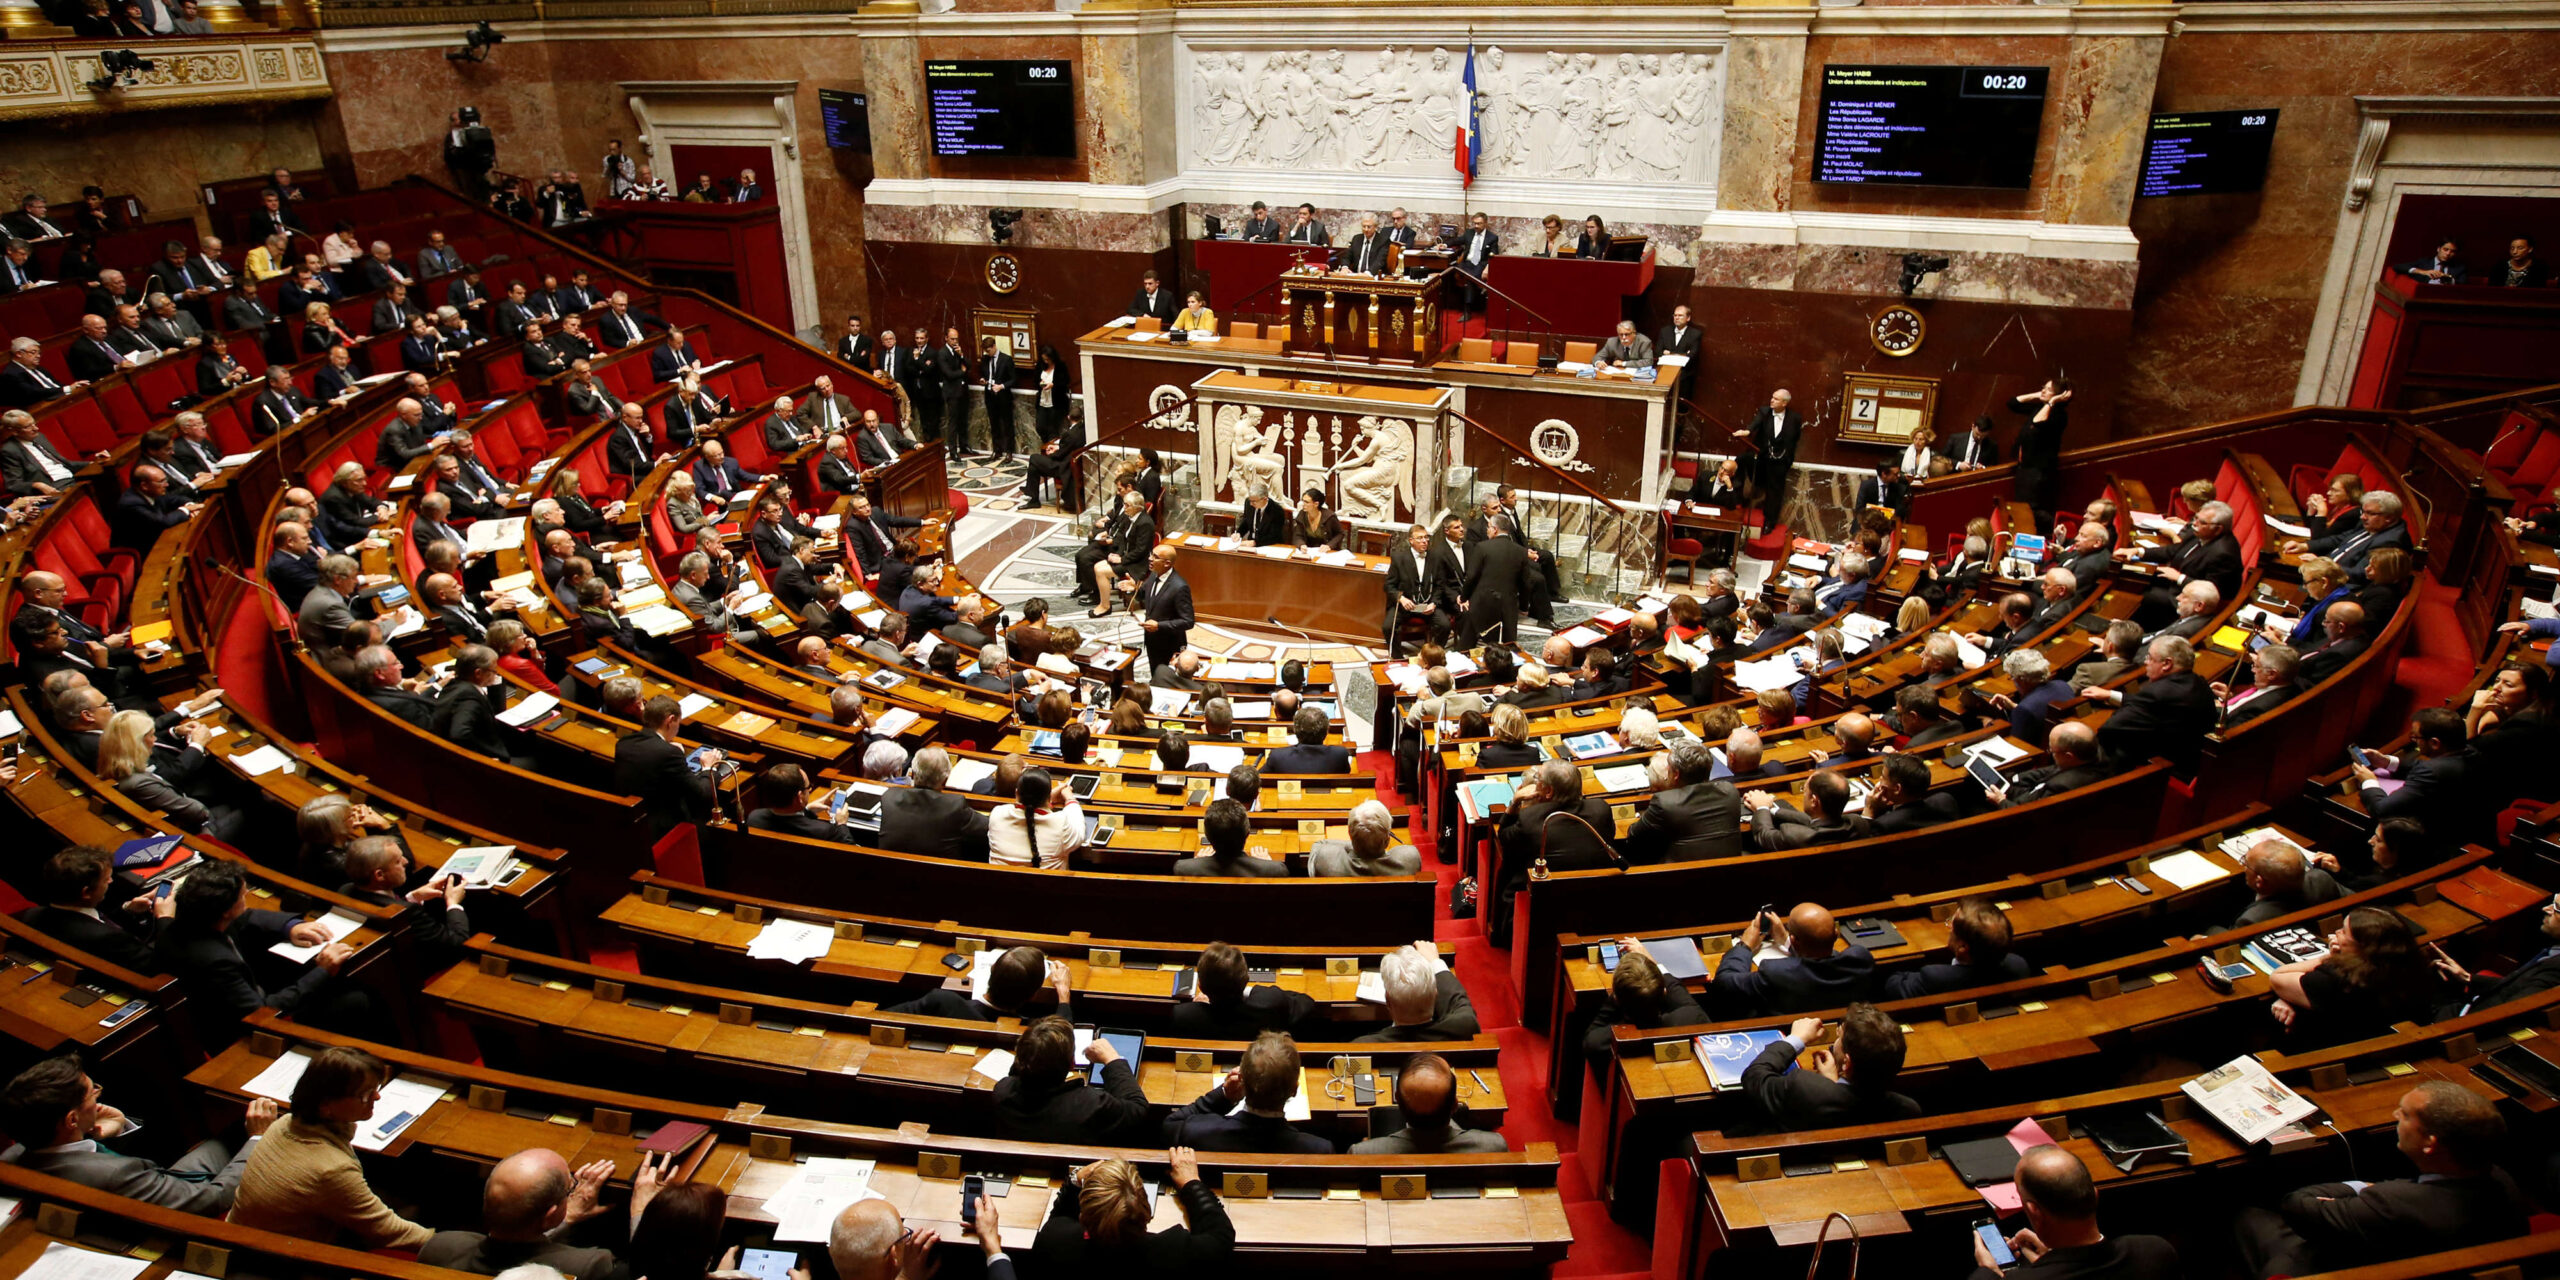 General view of the hemicycle during the questions to the government session at the National Assembly in Paris